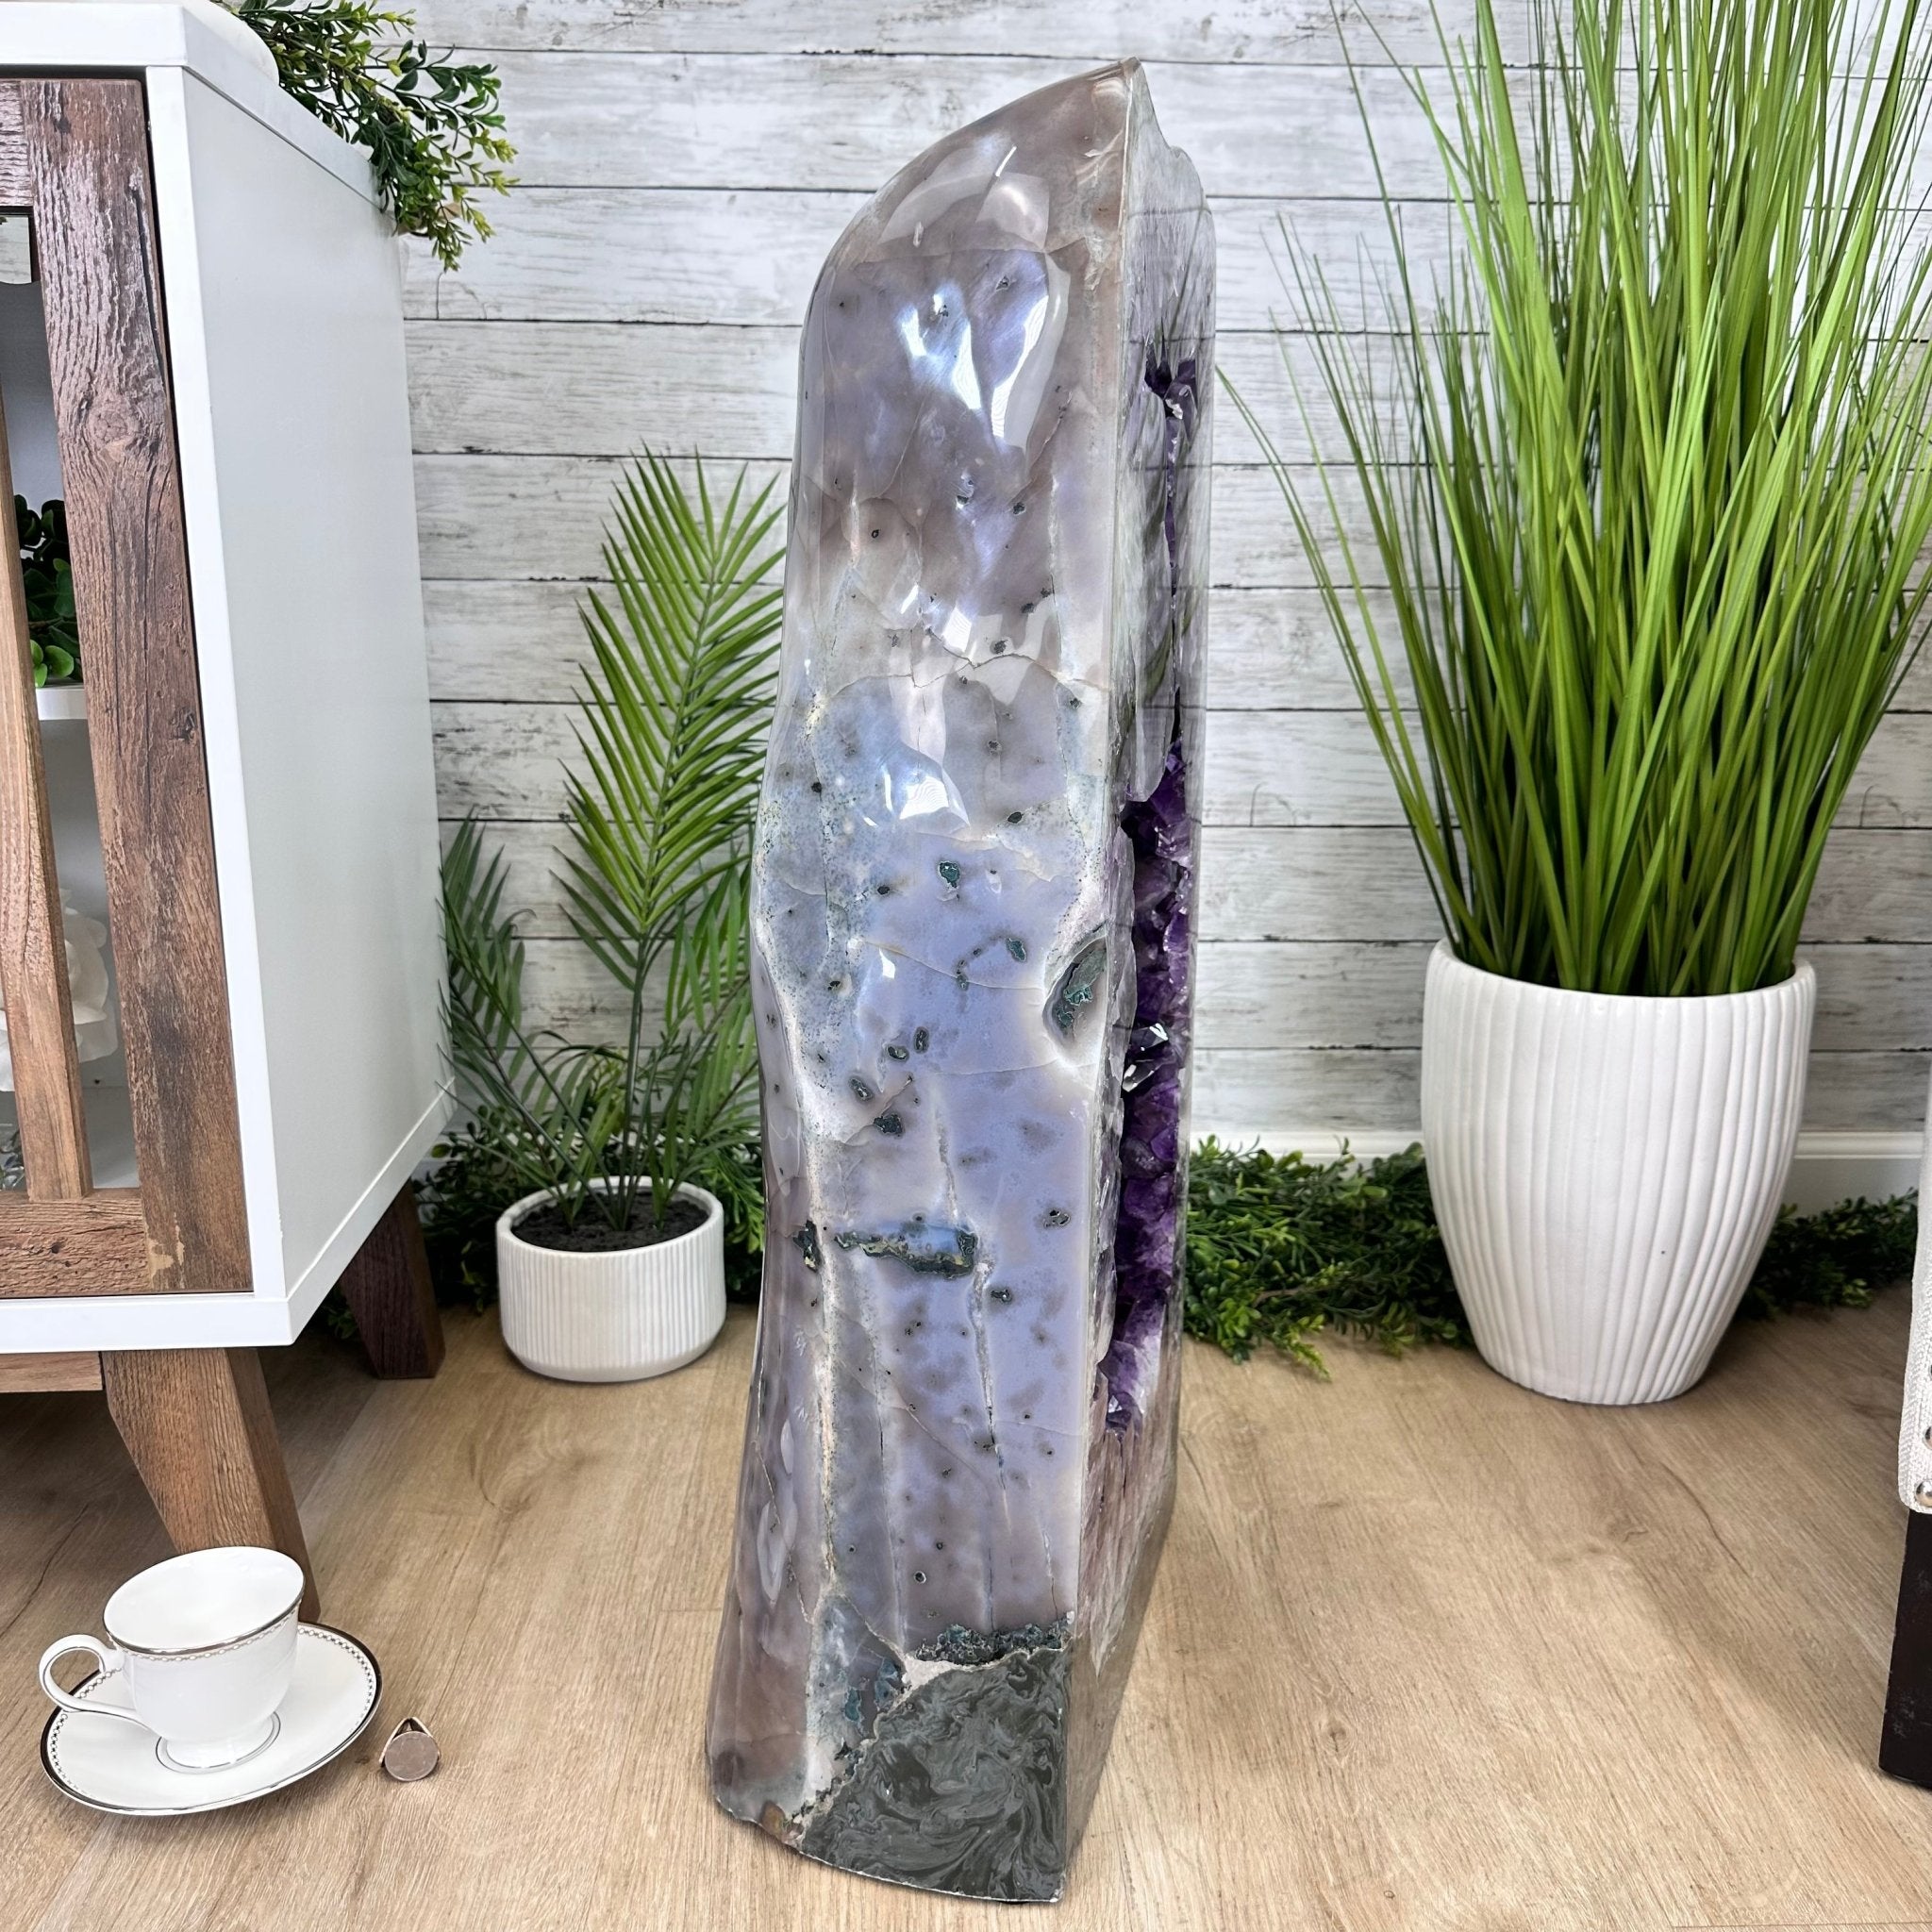 Super Quality Polished Brazilian Amethyst Cathedral, 184.3 lbs & 29.3" tall Model #5602-0082 by Brazil Gems - Brazil GemsBrazil GemsSuper Quality Polished Brazilian Amethyst Cathedral, 184.3 lbs & 29.3" tall Model #5602-0082 by Brazil GemsPolished Cathedrals5602-0082